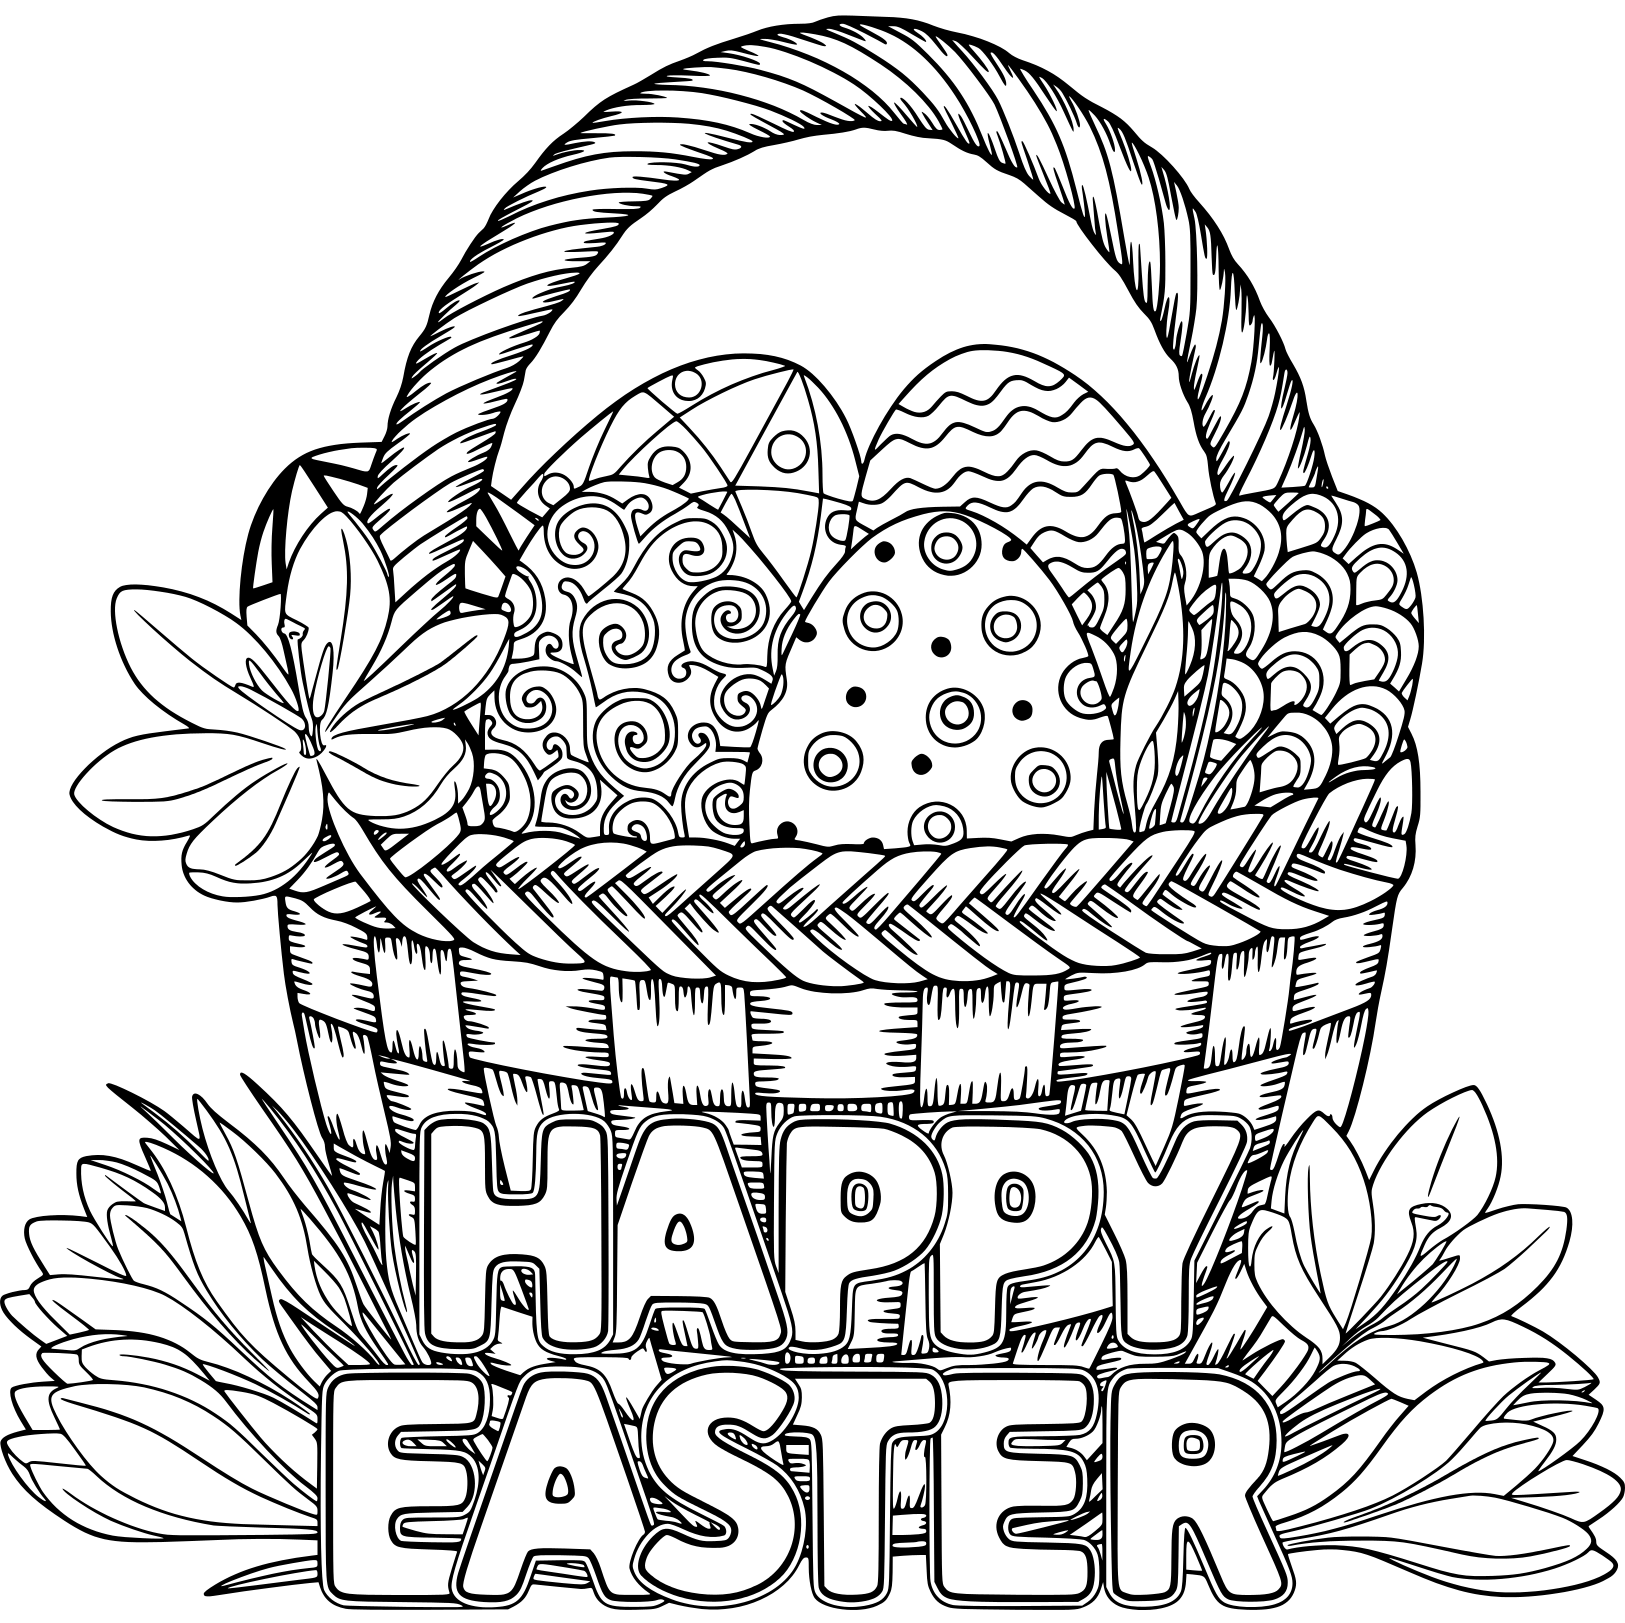 Basket Egg Adult Happy Easter Coloring Page